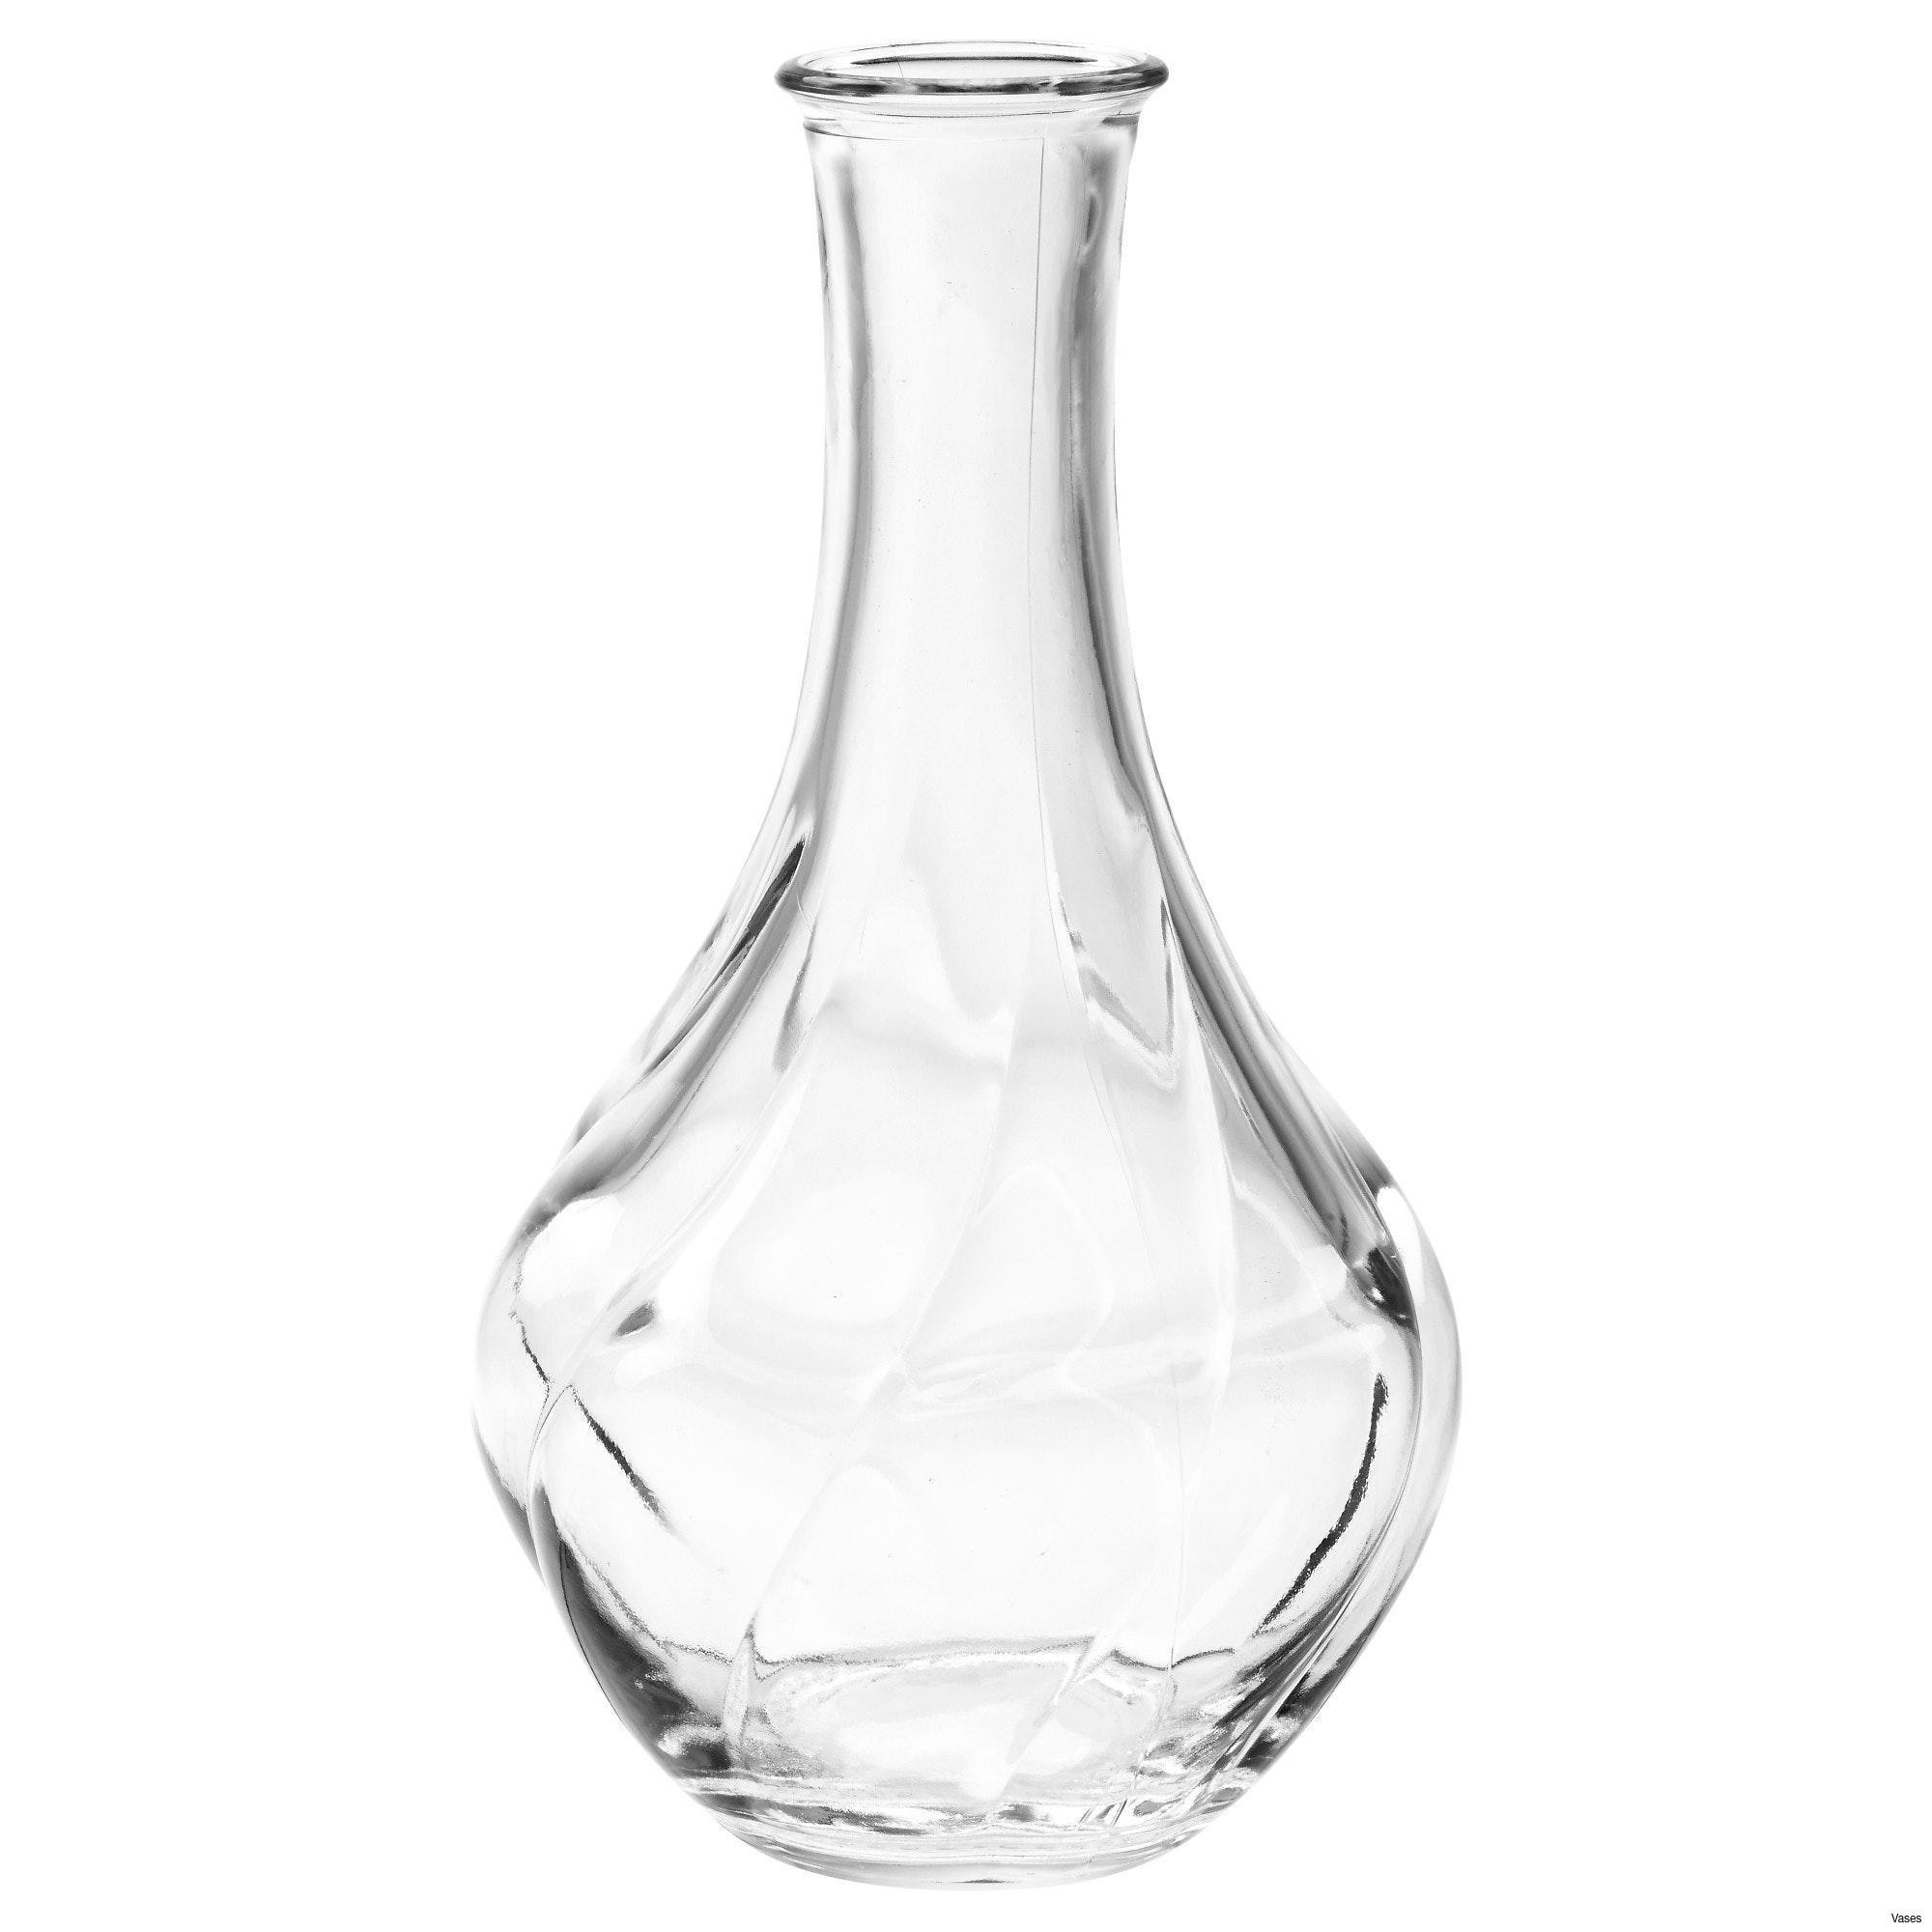 target glass vase of extra large glass vase image living room glass vases fresh clear within extra large glass vase image living room glass vases fresh clear vase 0d tags amazing and